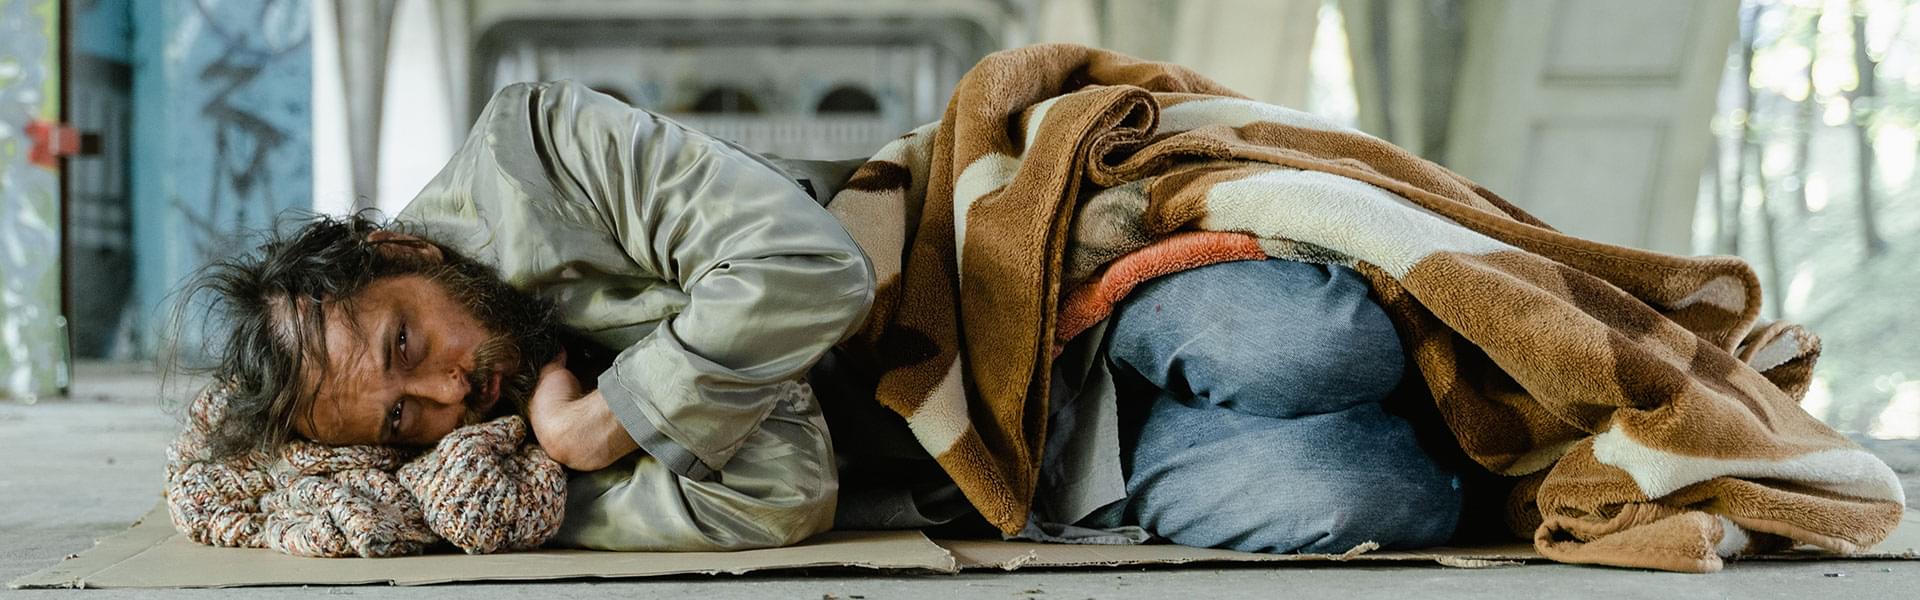 Why are so many people homeless?